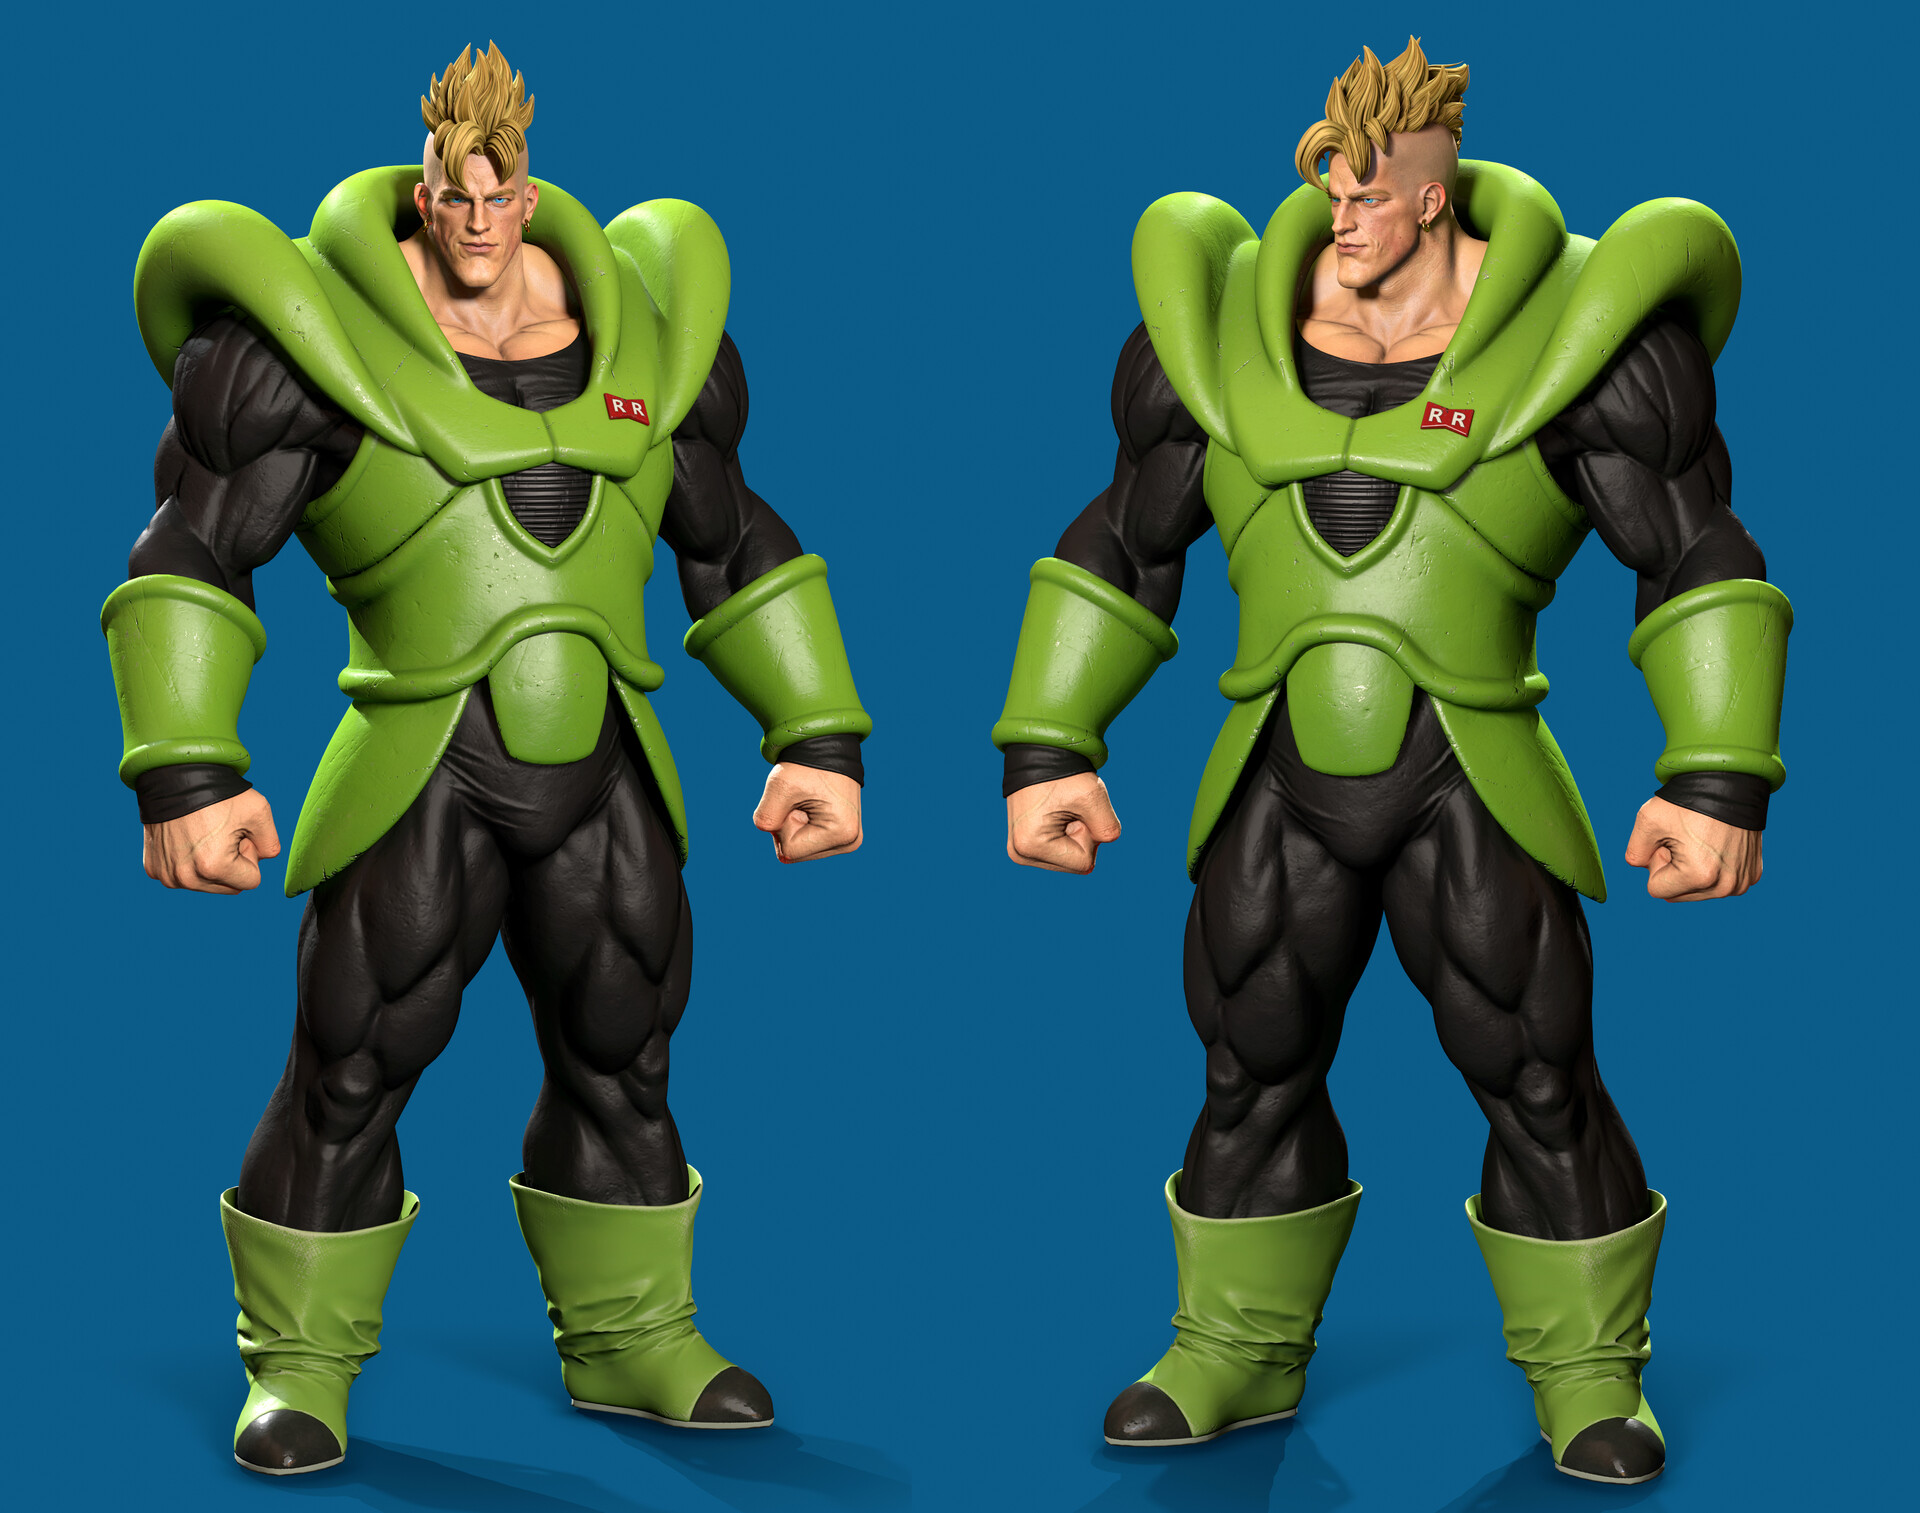 Android 16 Fan Casting